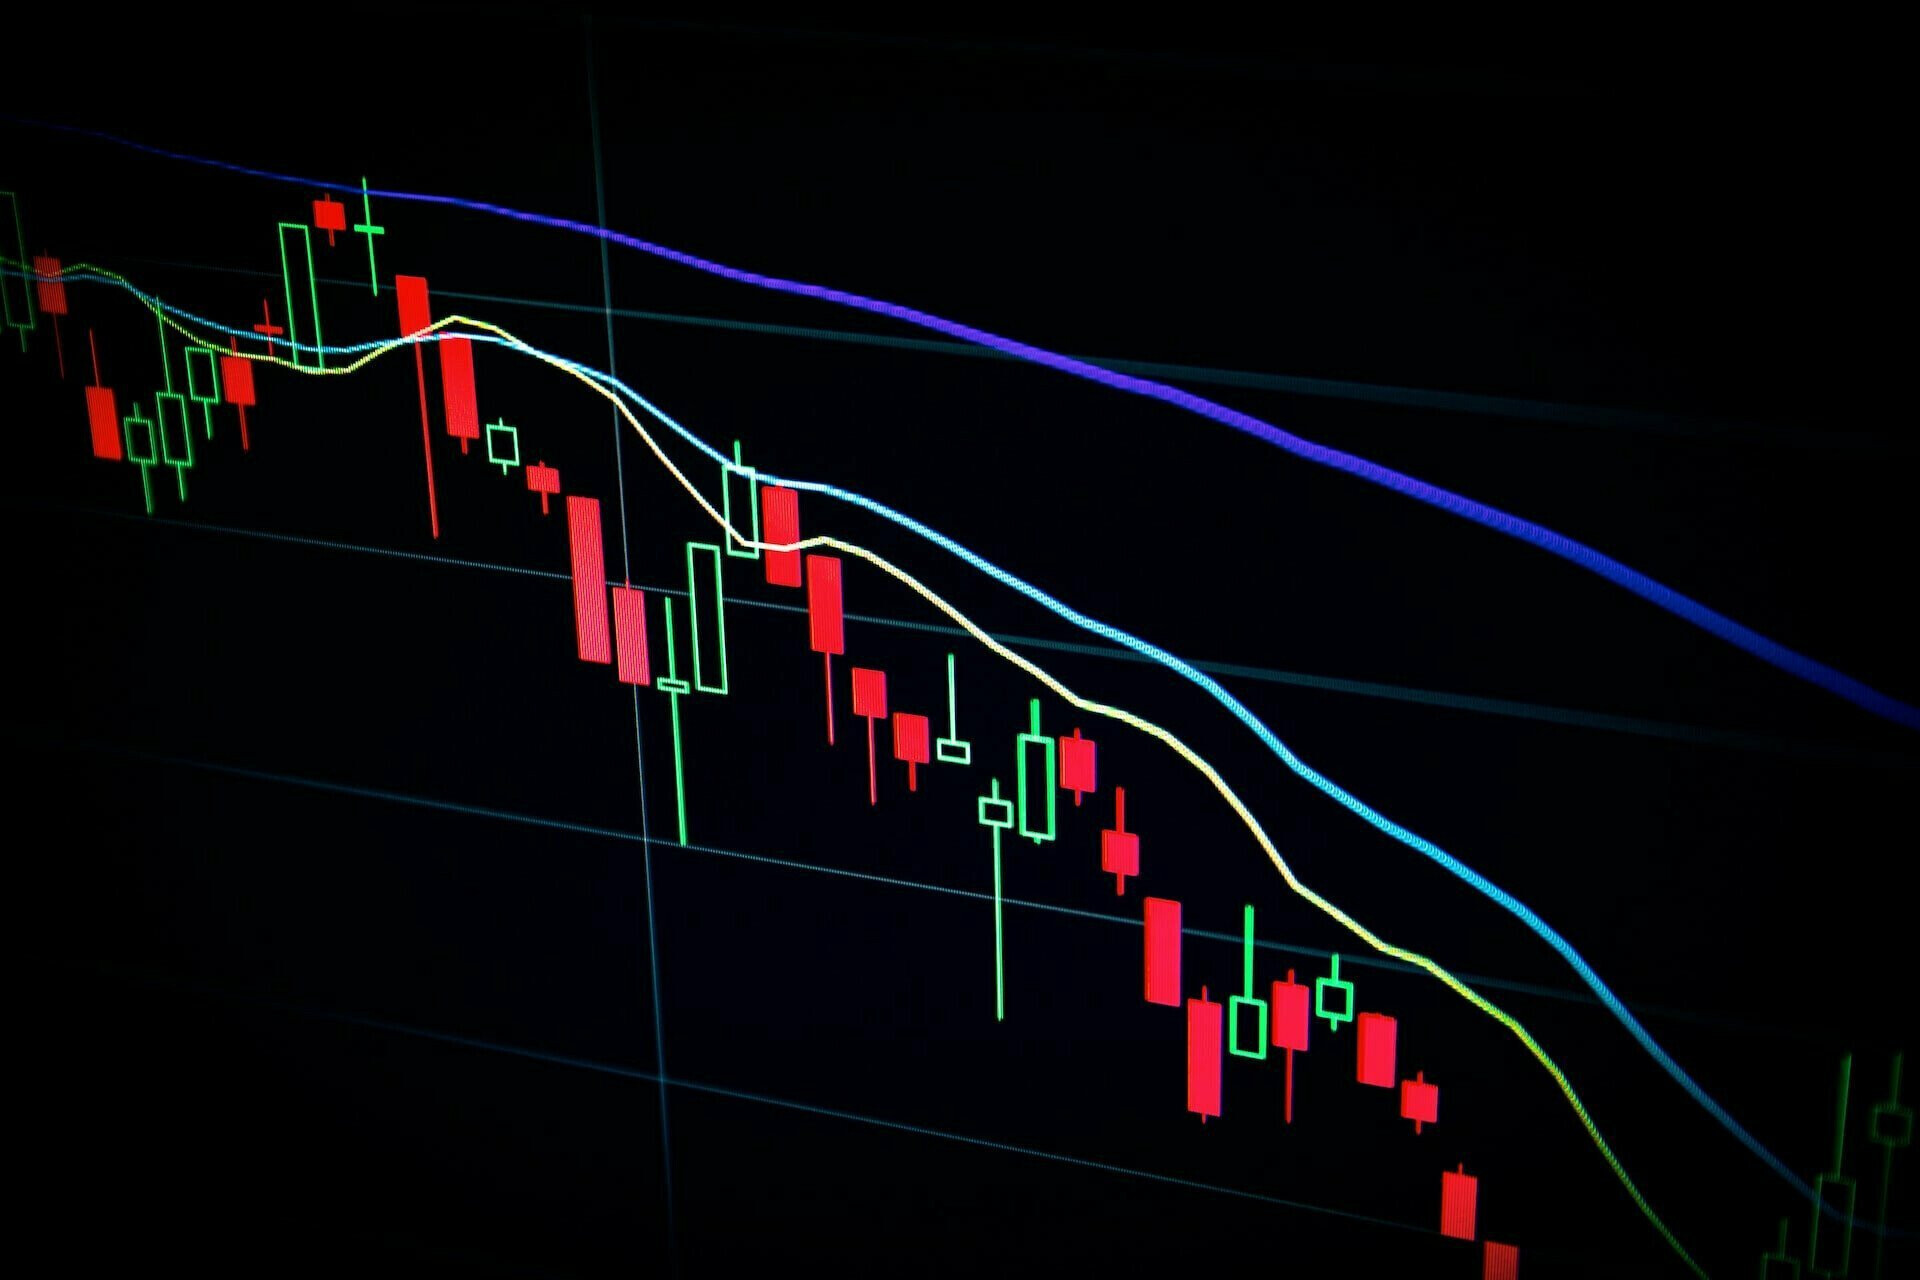 On-Chain Data: Short-Term Bitcoin Holders Face Losses Amid Price Decline – Here's the Latest